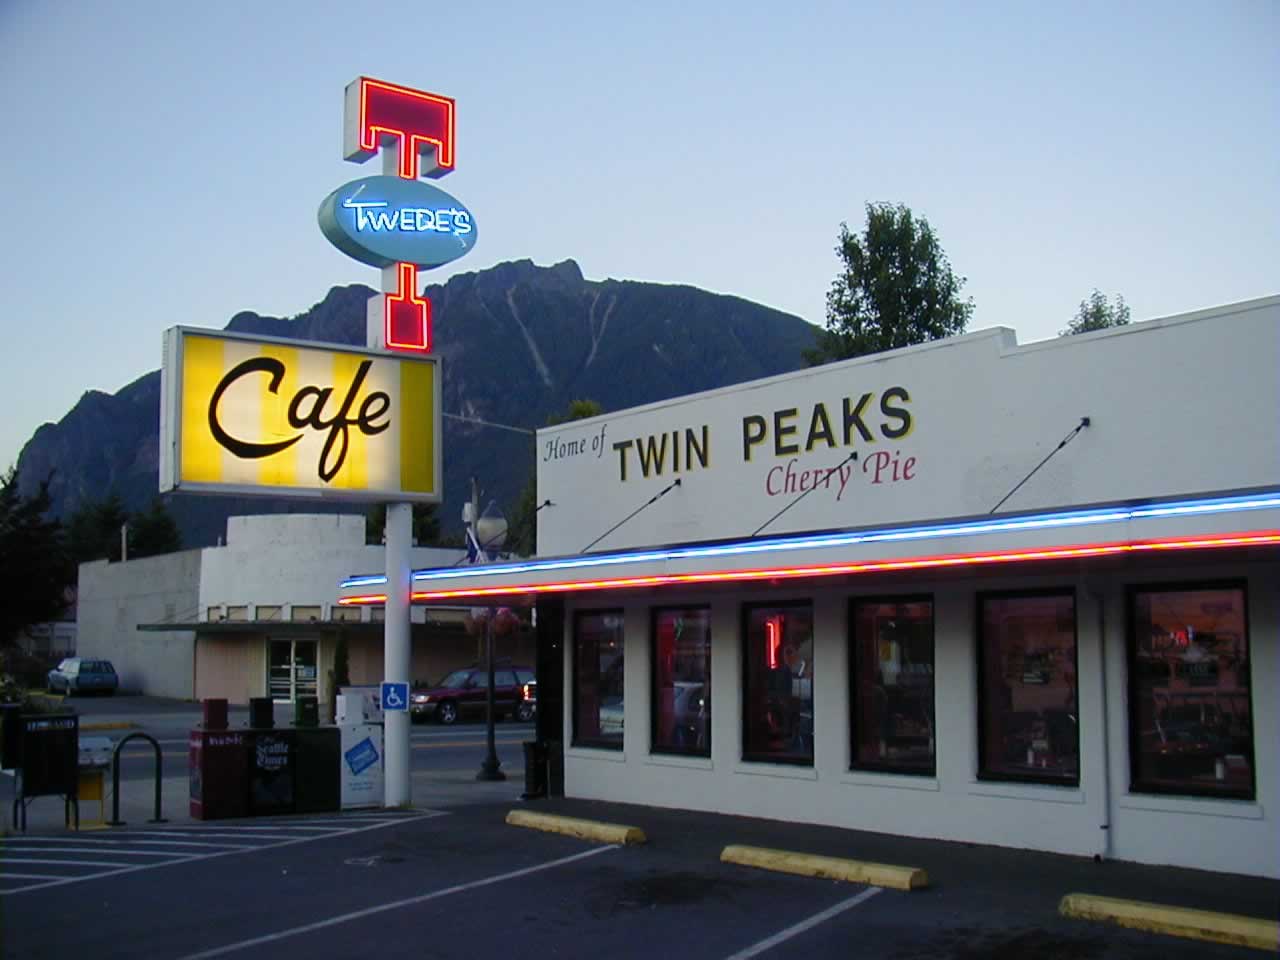 Seattle travel guide SIA - twedes cafe twin peaks double r